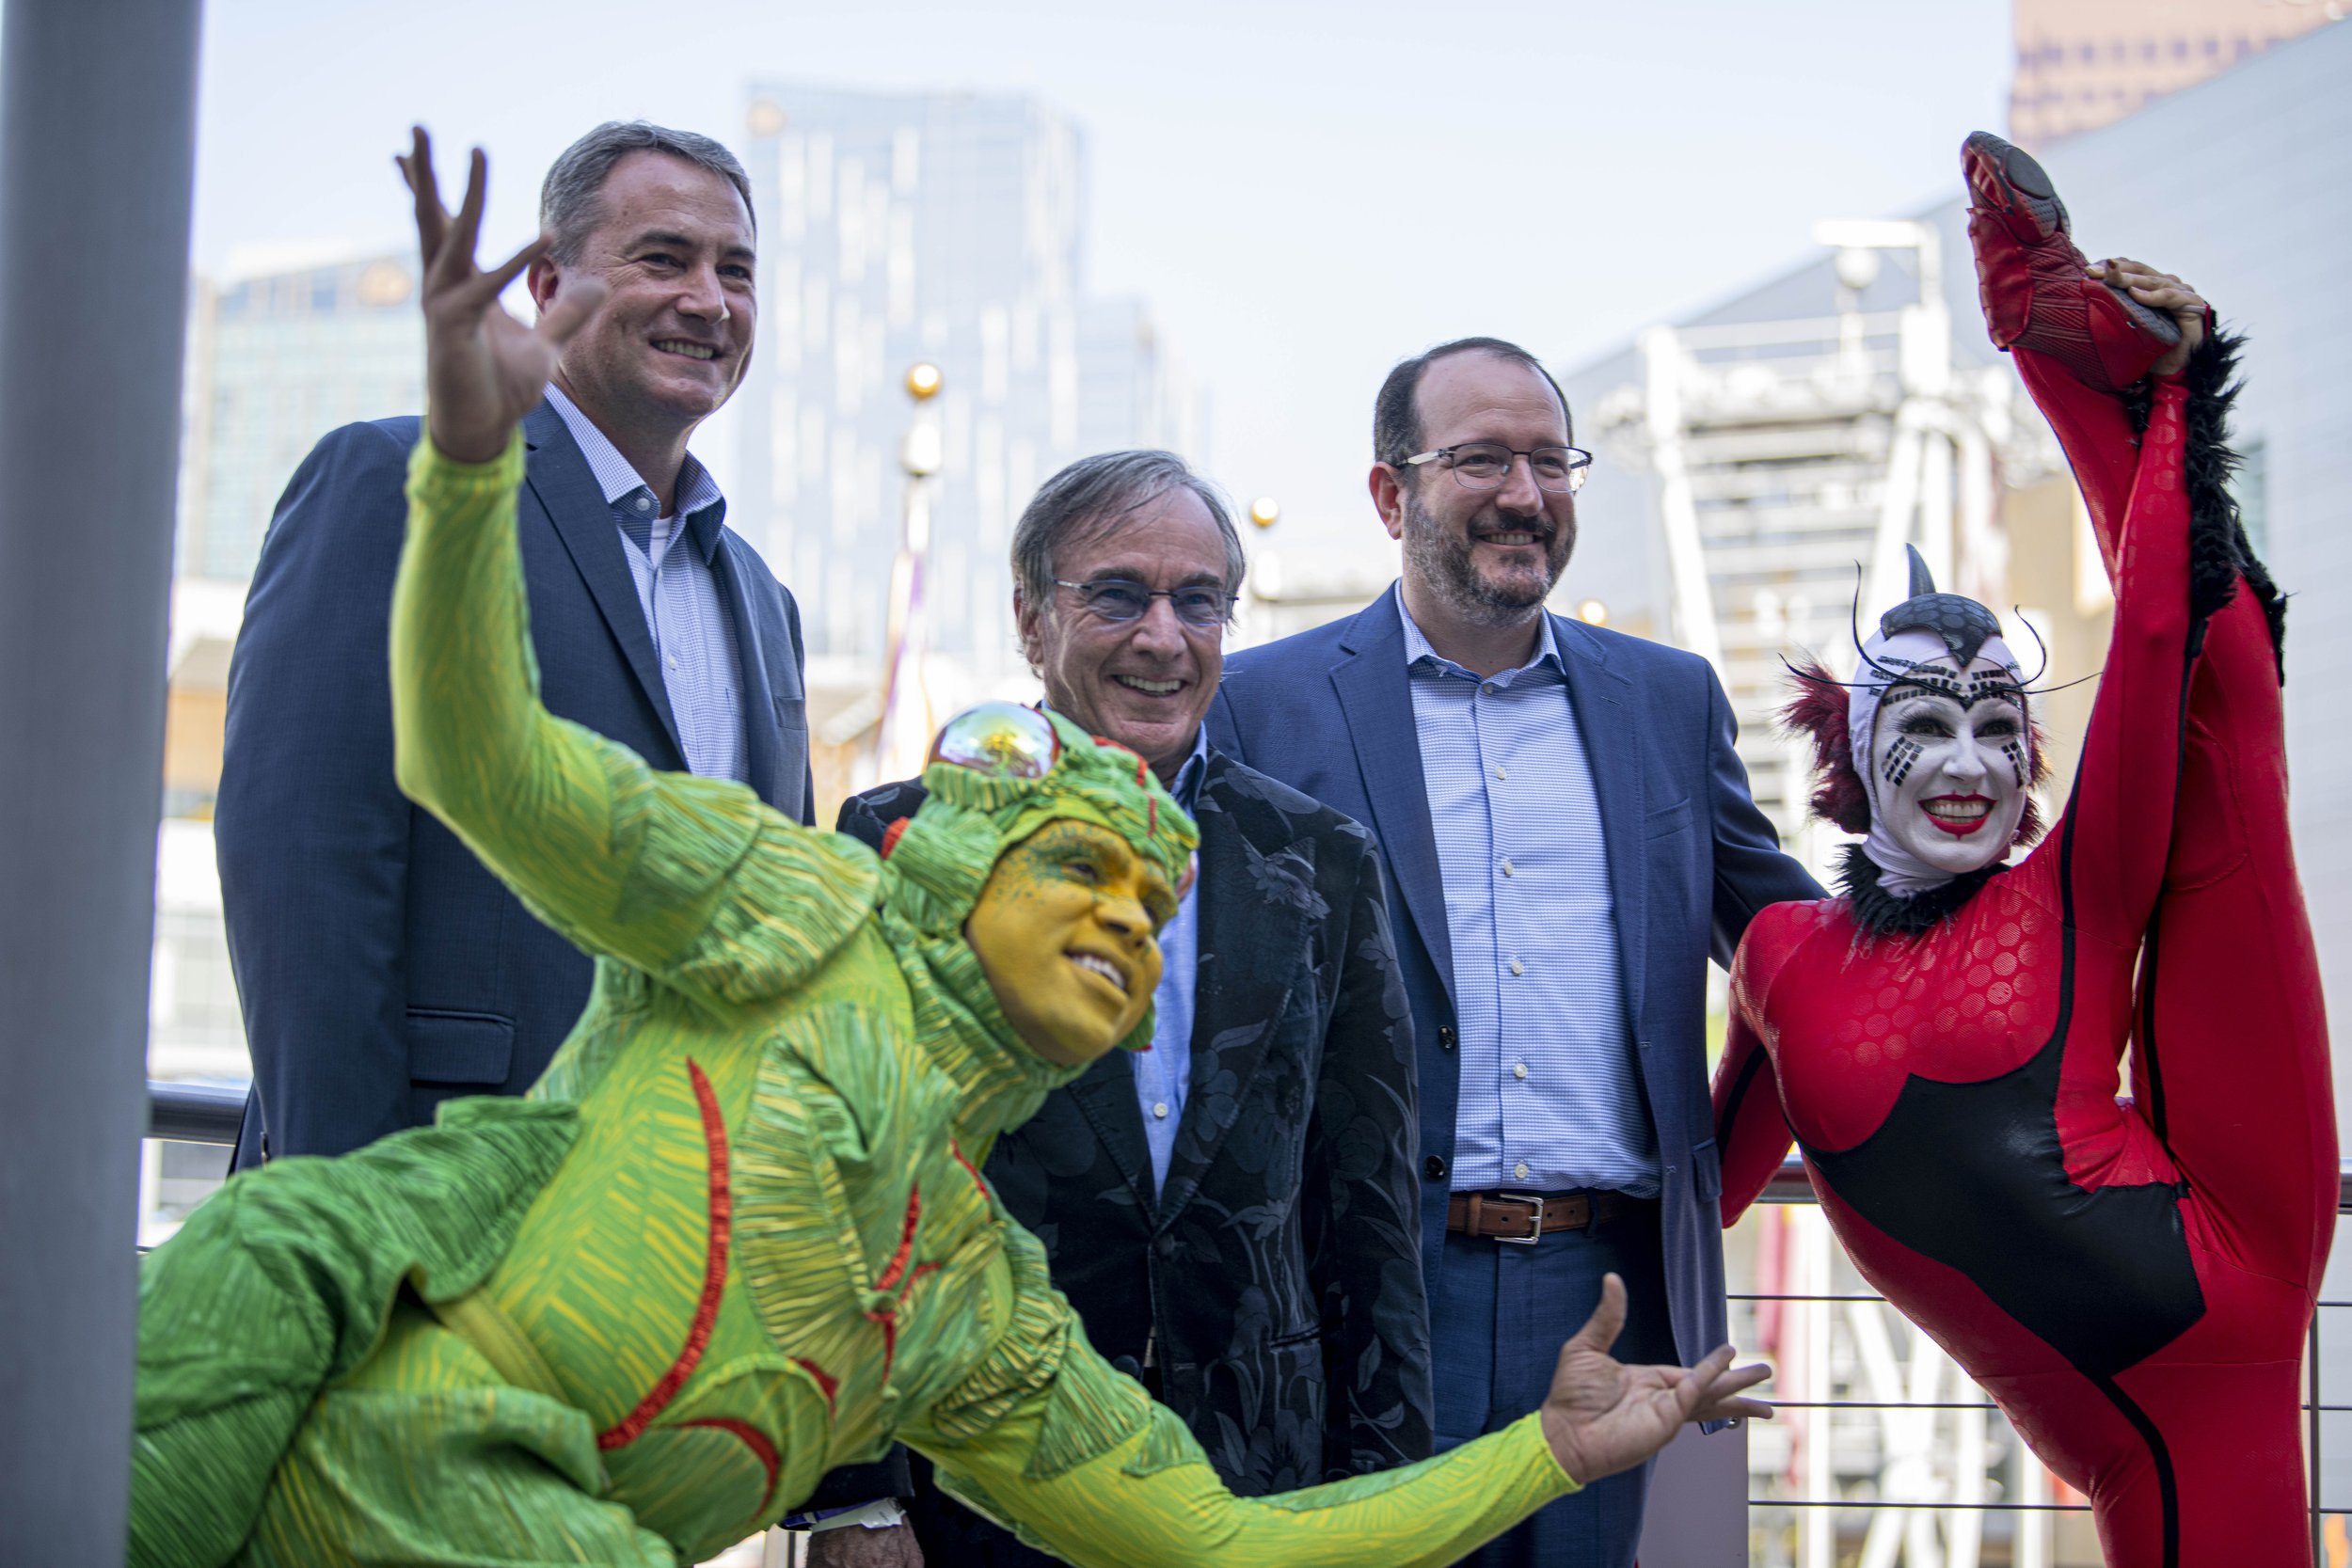  Executive members including President David Lamarre of Cirque du Soleil and a few of their performers pose for a picture on Nov. 10, 2021, after making the announcement that Cirque du Soleil and its new partner OVO entertainment group will be perfor